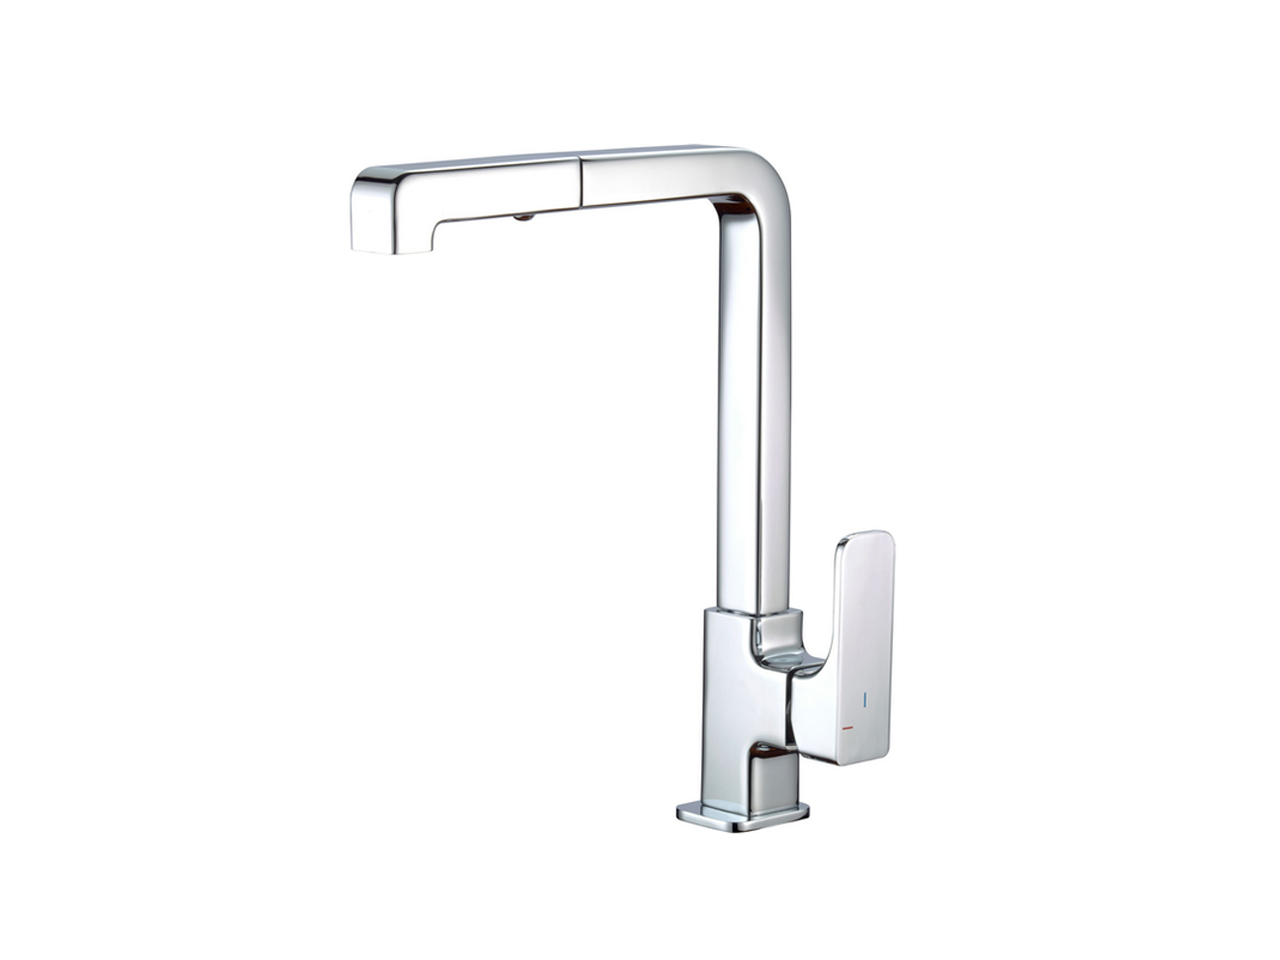 CisalSingle lever sink mixer ES with pull out handspray KITCHEN_CU000575